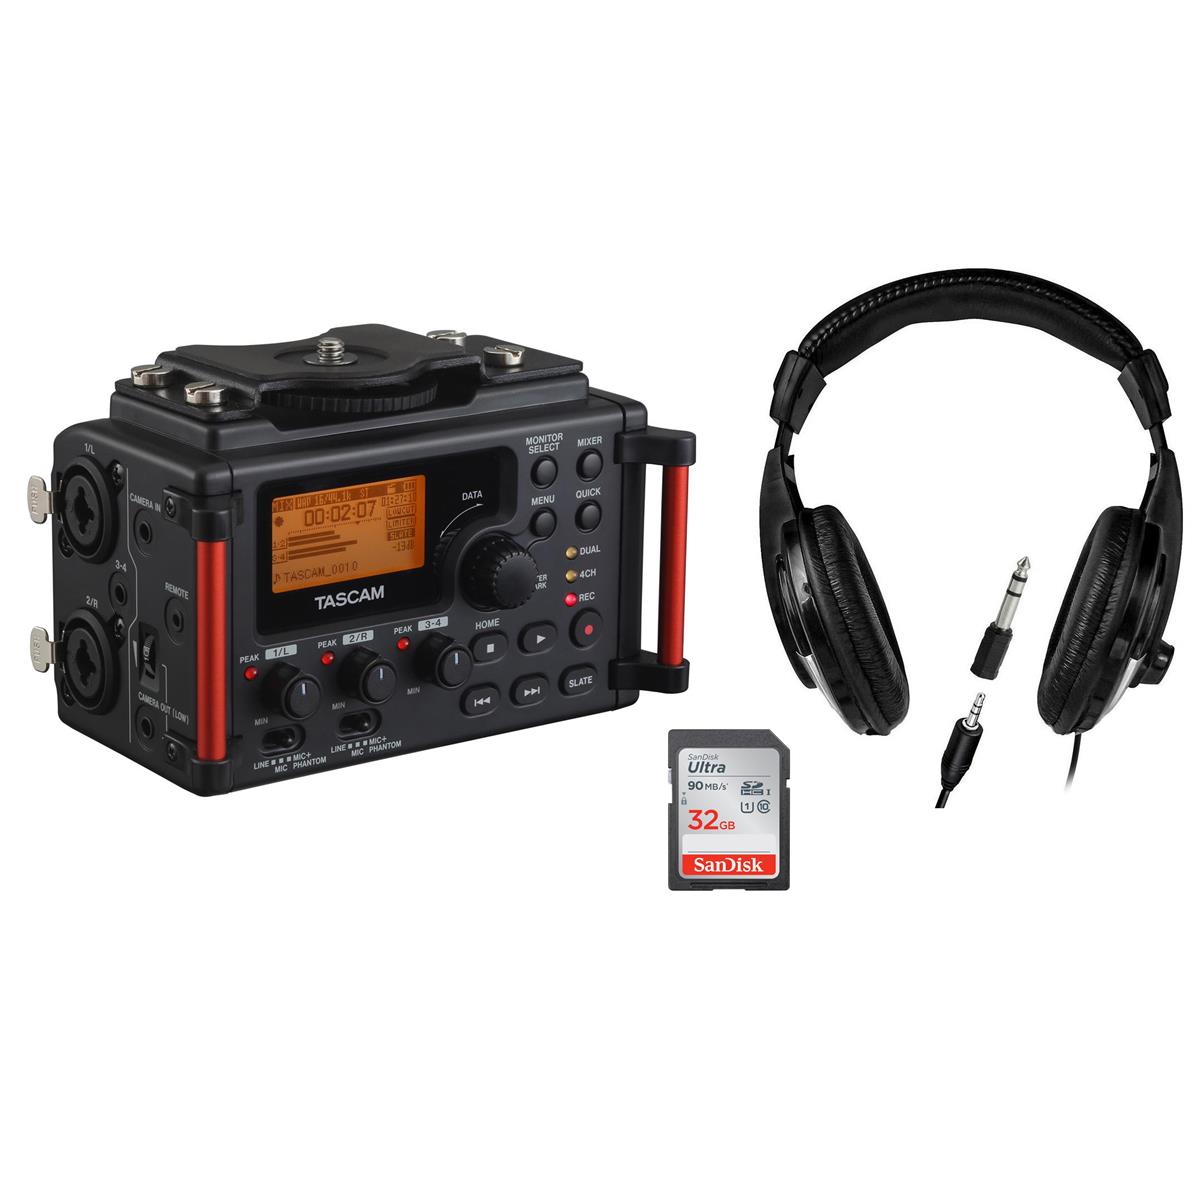 Tascam DR-60D MKII Portable Recorder for DSLR With Accessory Bundle -  DR-60DMK2 D